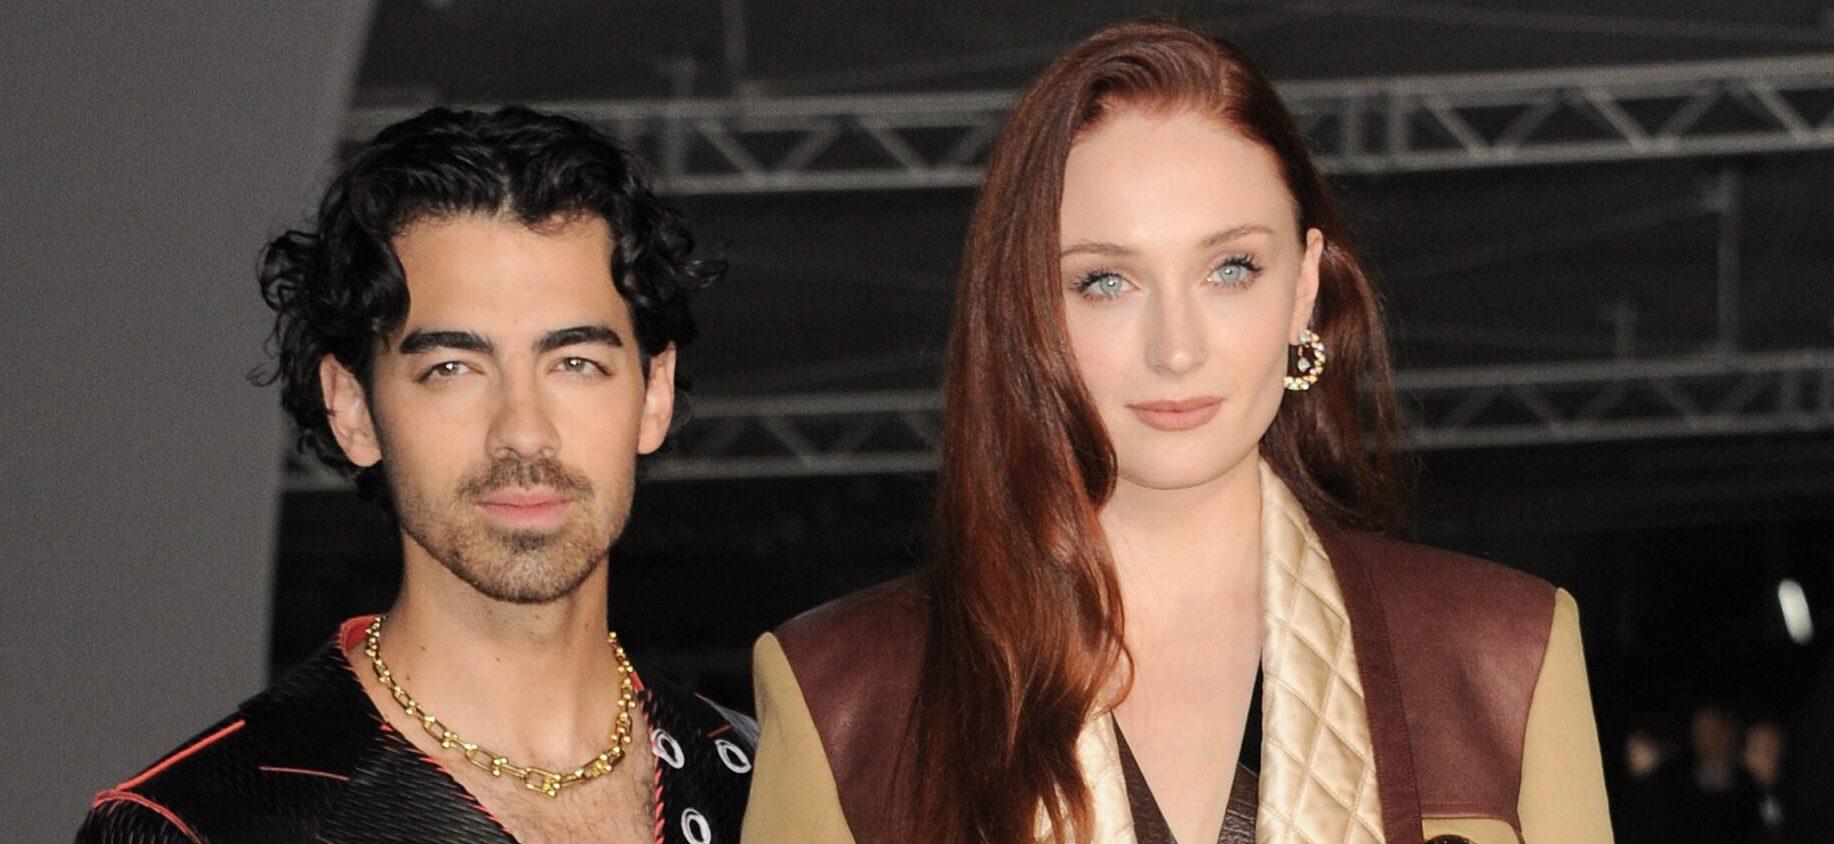 Sophie Turner & Joe Jonas’ Divorce Rumors Cause Confusion As Fans Spot The Actress At His Concert